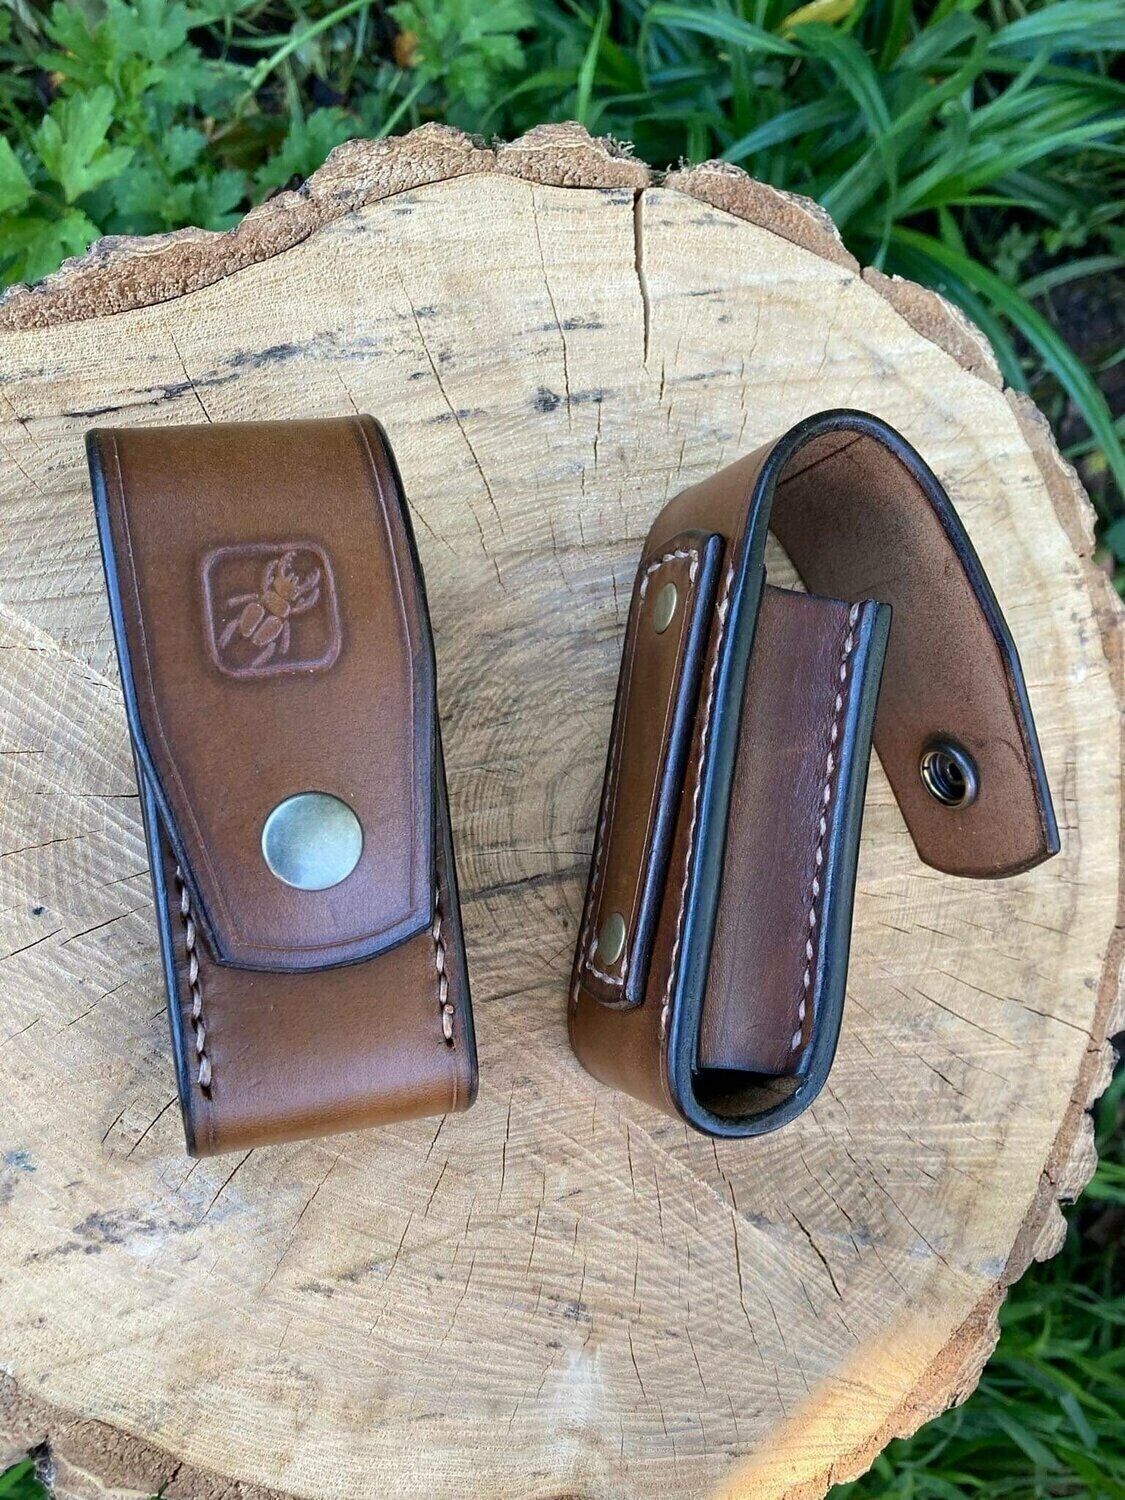 Handcrafted Leatherman Wave Pouch - loop added by request